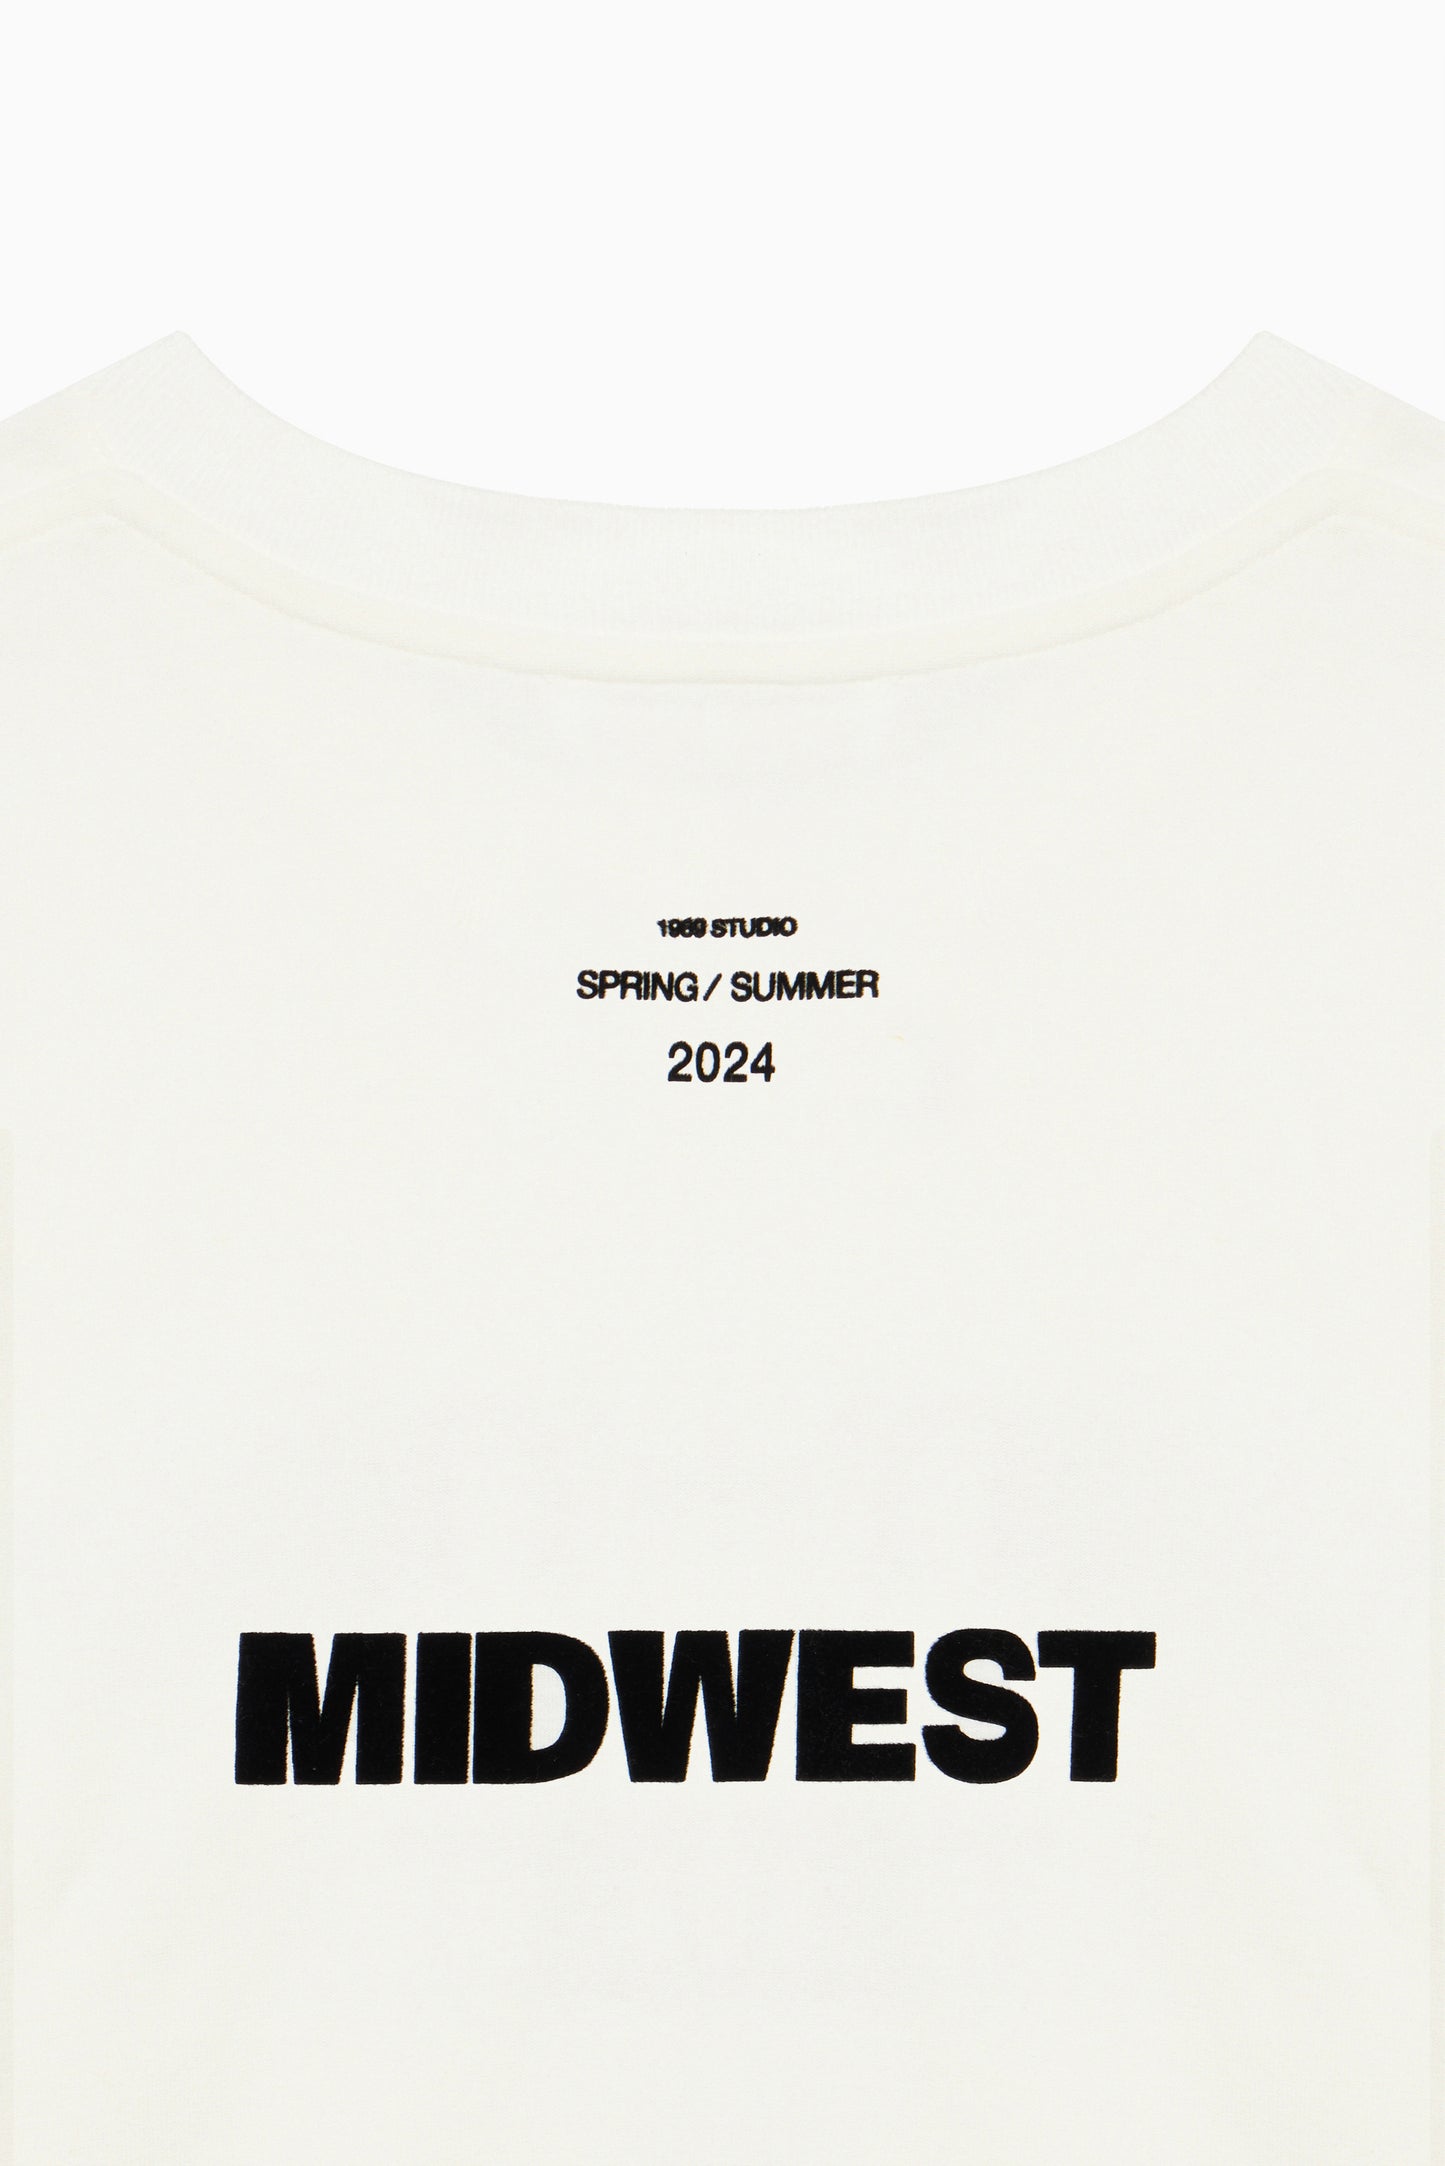 Man's Midwest T-Shirt